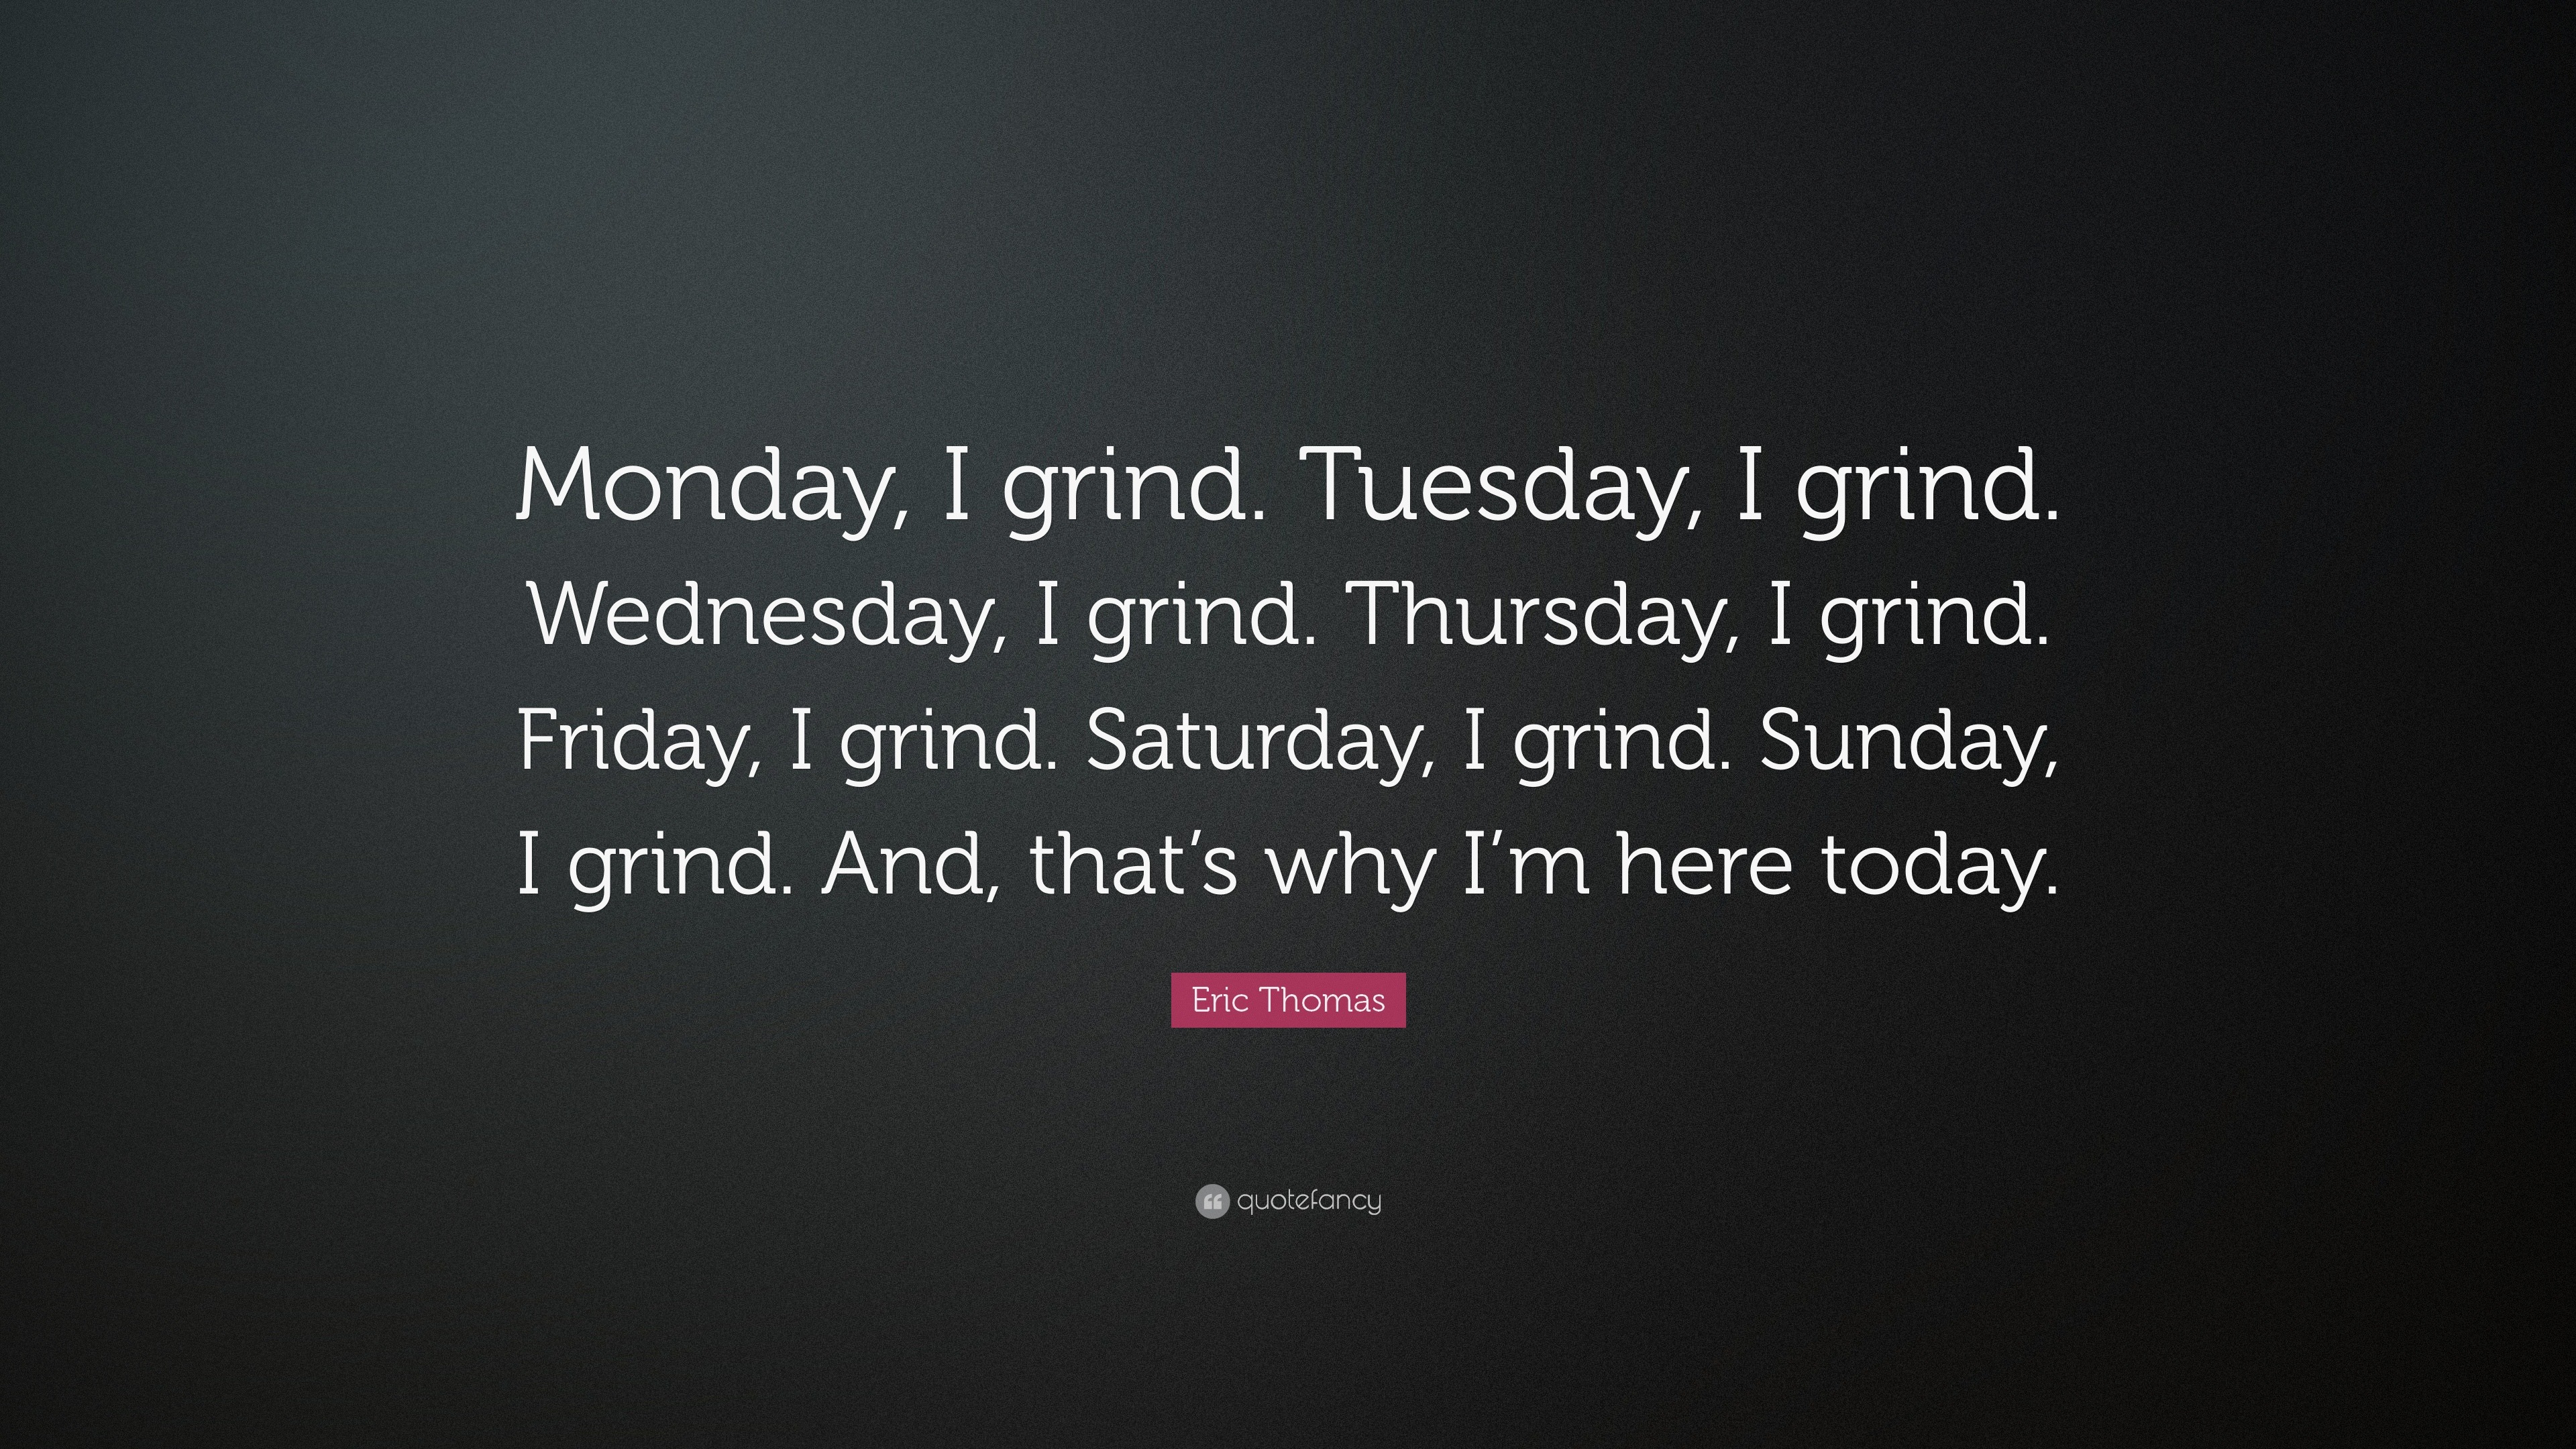 Eric Thomas Quotes (100 wallpapers) - Quotefancy